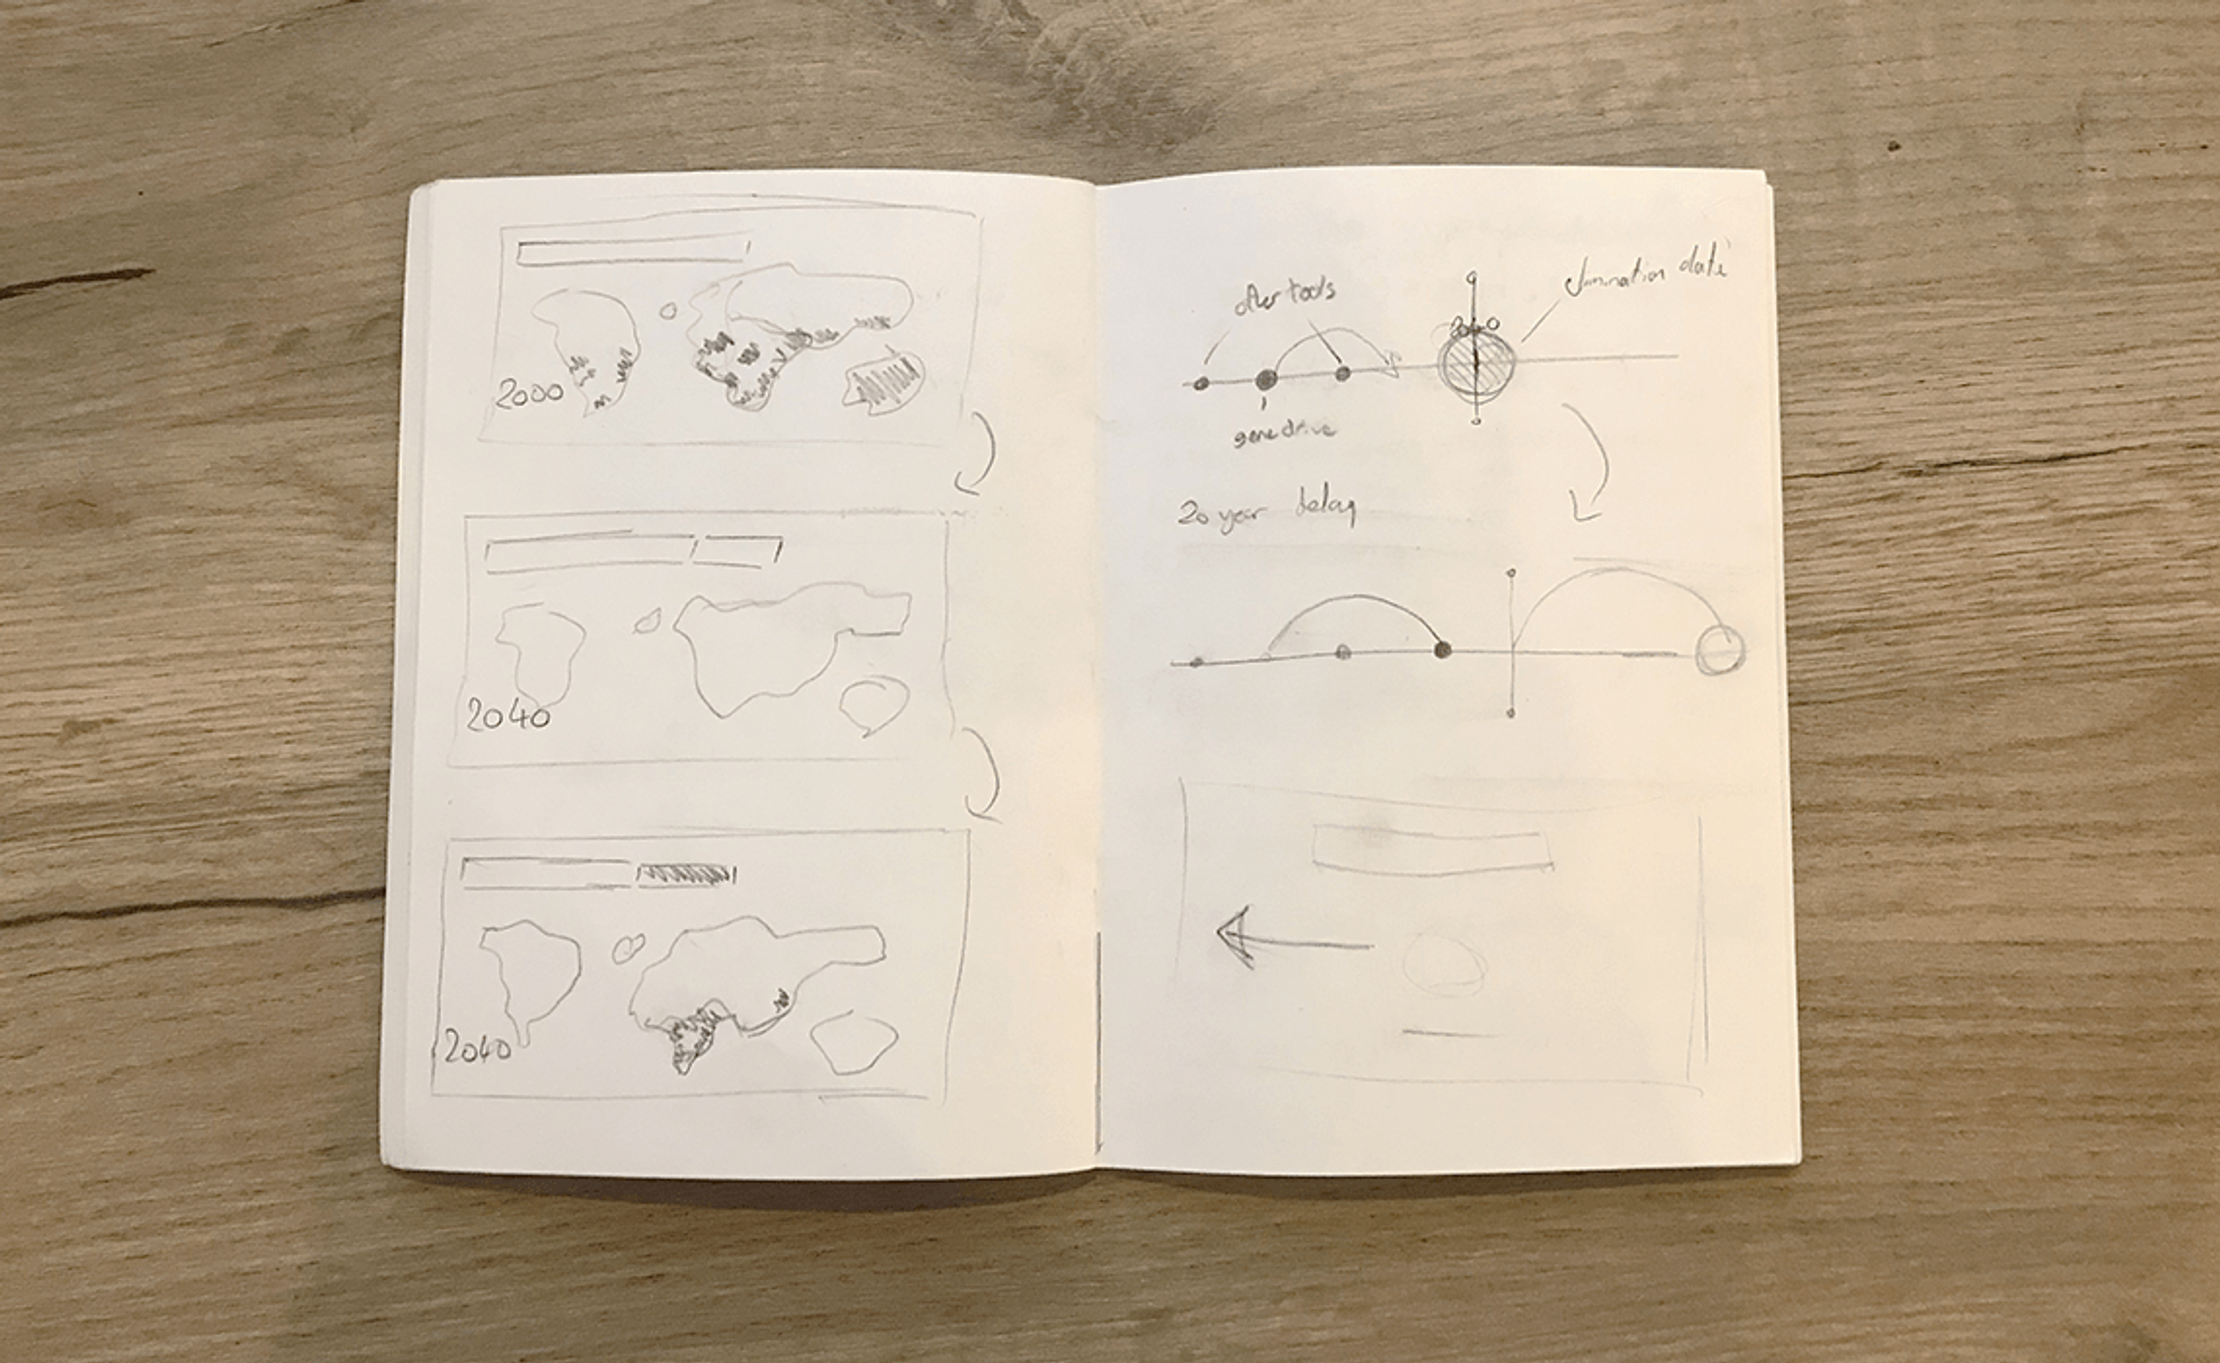 A sketchbook laid open across a two page spread. On both pages are sketches of maps and visualisations used to plan the Malaria off the Map visuals.